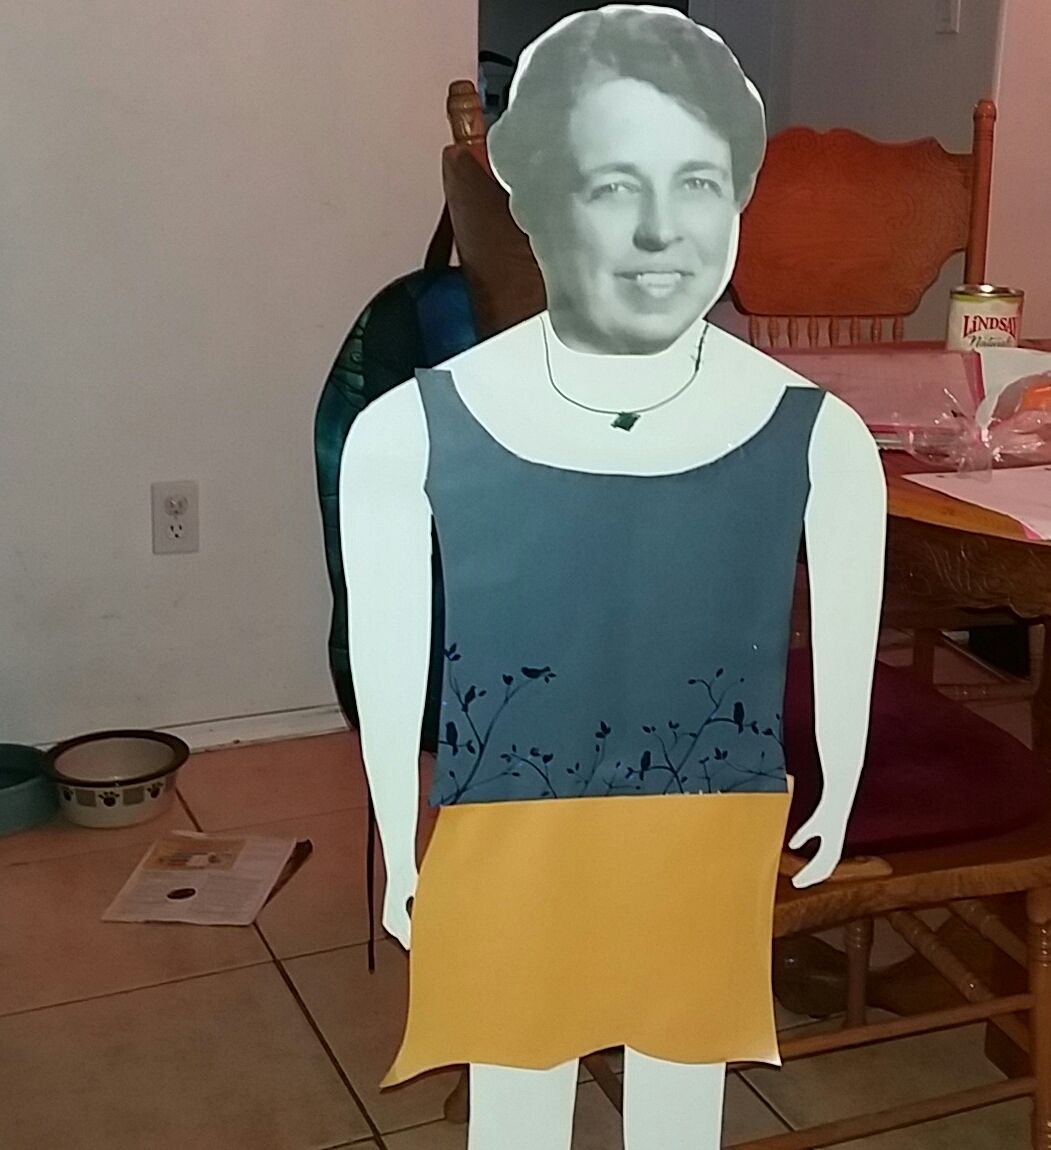 This cut out of Eleanor Roosevelt my niece made for school looks like a South Park character.